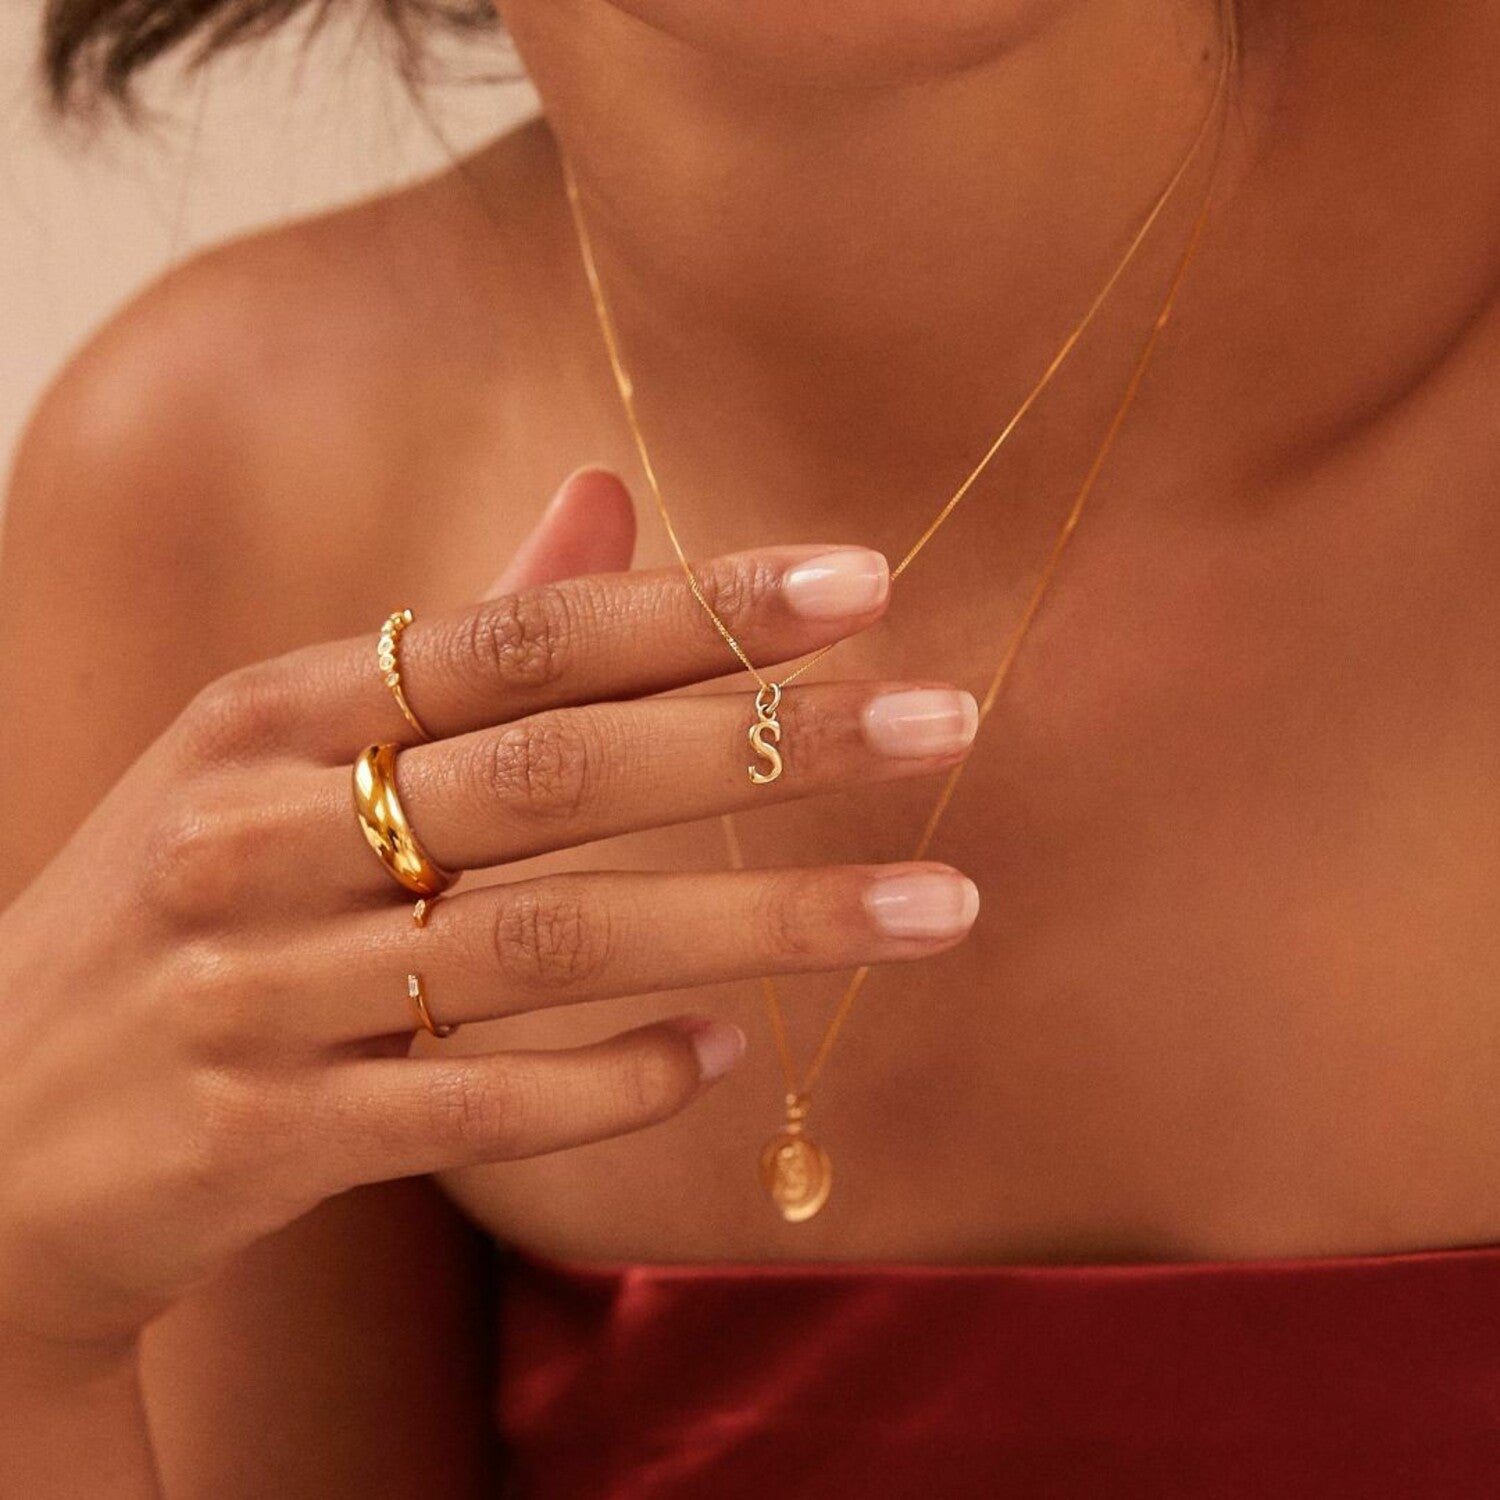 Solid gold curve initial letter necklace 'S' around the neck of a woman holding it up with the back of her fingers that are wearing a gold plain dome ring, a gold diamond style eternity ring and a gold diamond style baguette gap ring on her fingers